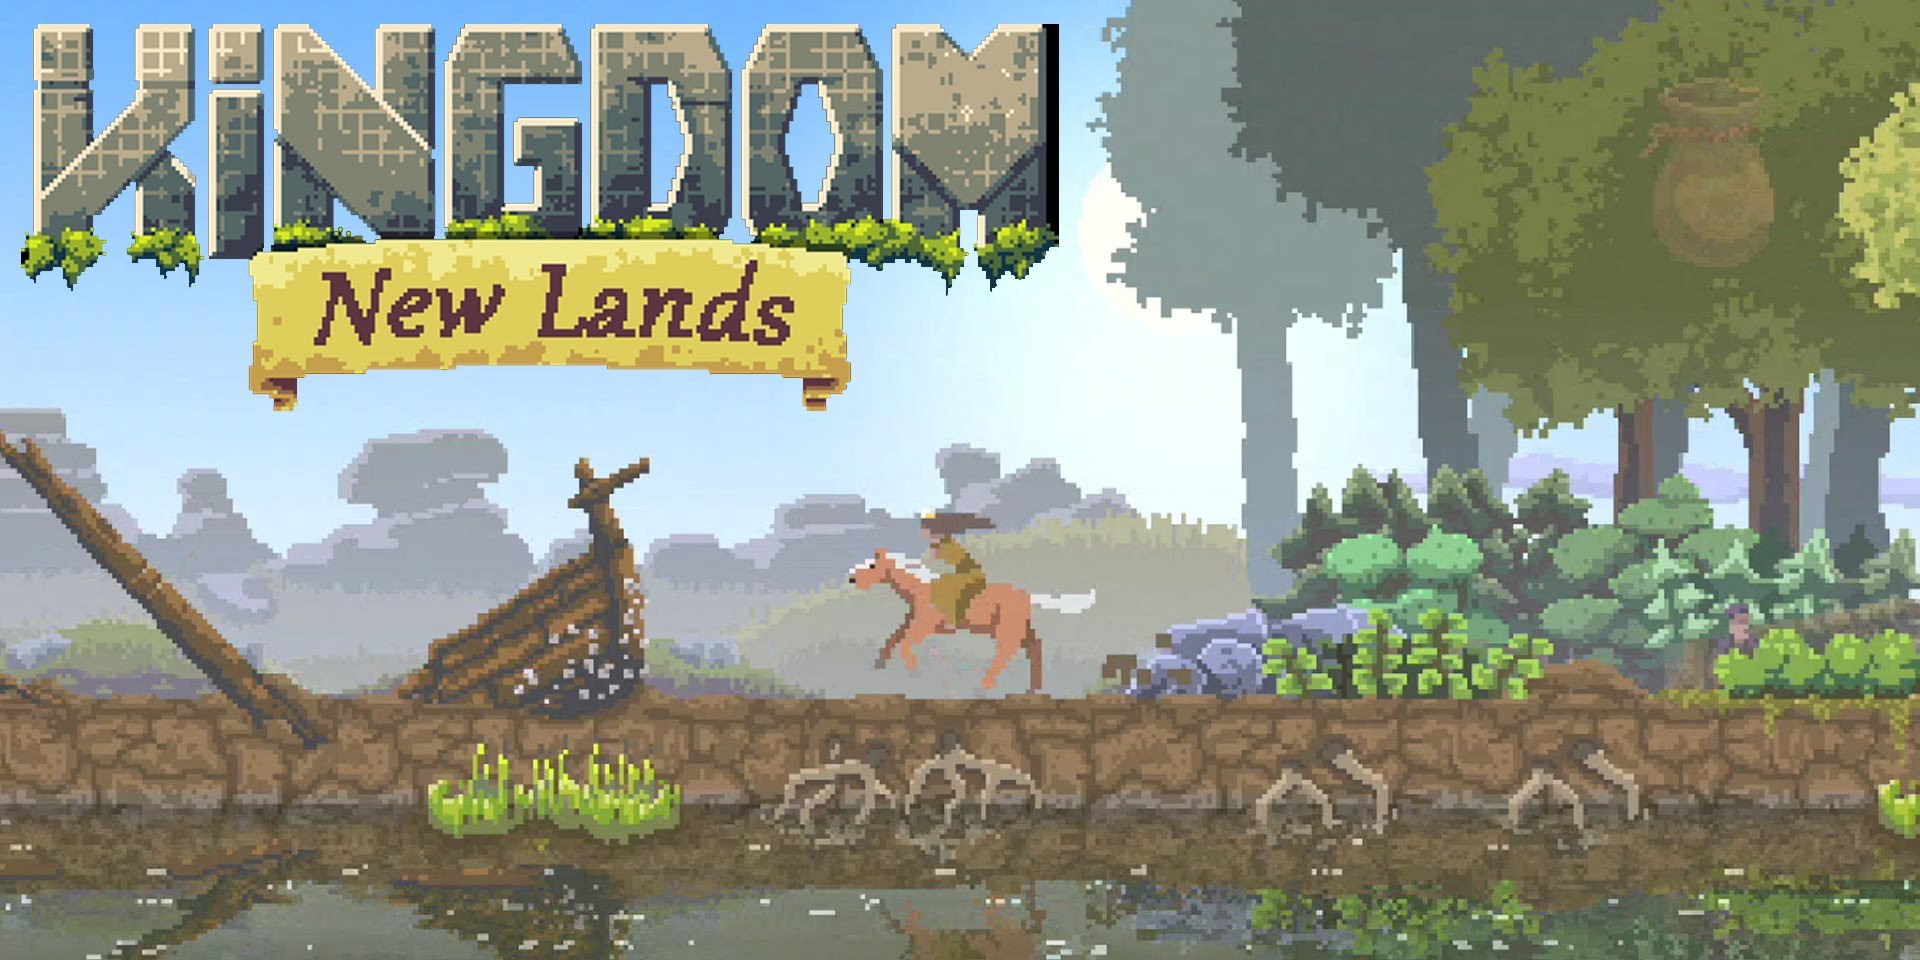 Holiday Android app deals - Kingdom: New Lands